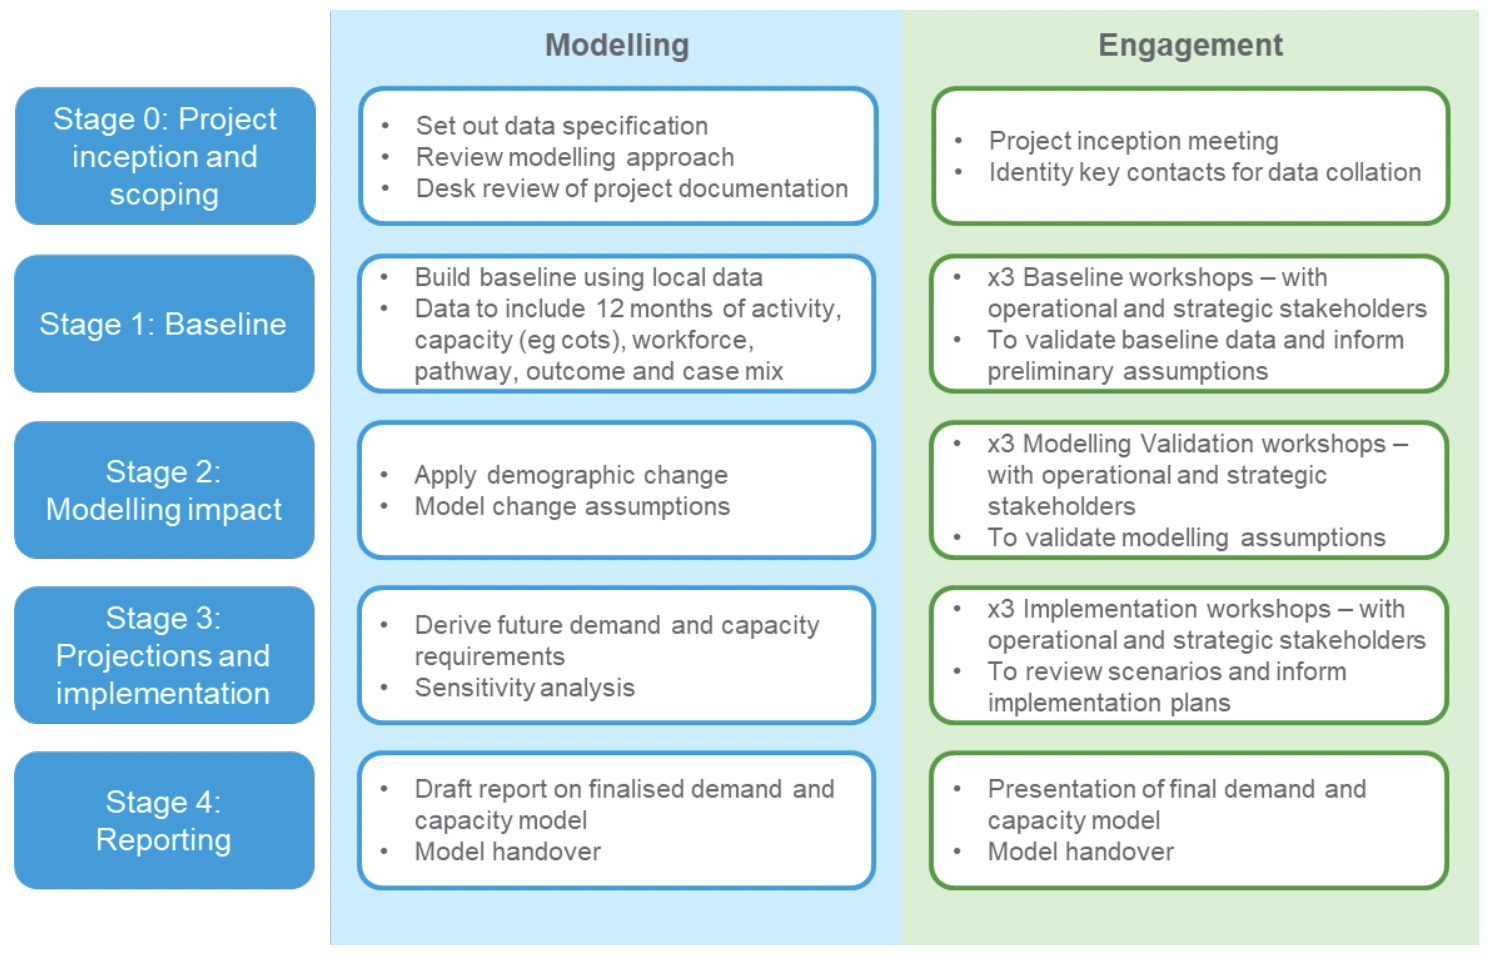 The scope of this report focuses on understanding the demand and physical capacity needs of the future model of neonatal care in Scotland. The approach to this work contains two main strands: modelling and engagement. Figure 1 provides an illustrative overview of each stage, alongside the key modelling and
engagement activities. Stage 0 – Project inception and scoping. Stage 1 – Baseline. Stage 2 – Modelling Impact. Stage 3 – Projections and implementation. Stage 4 - Reporting
